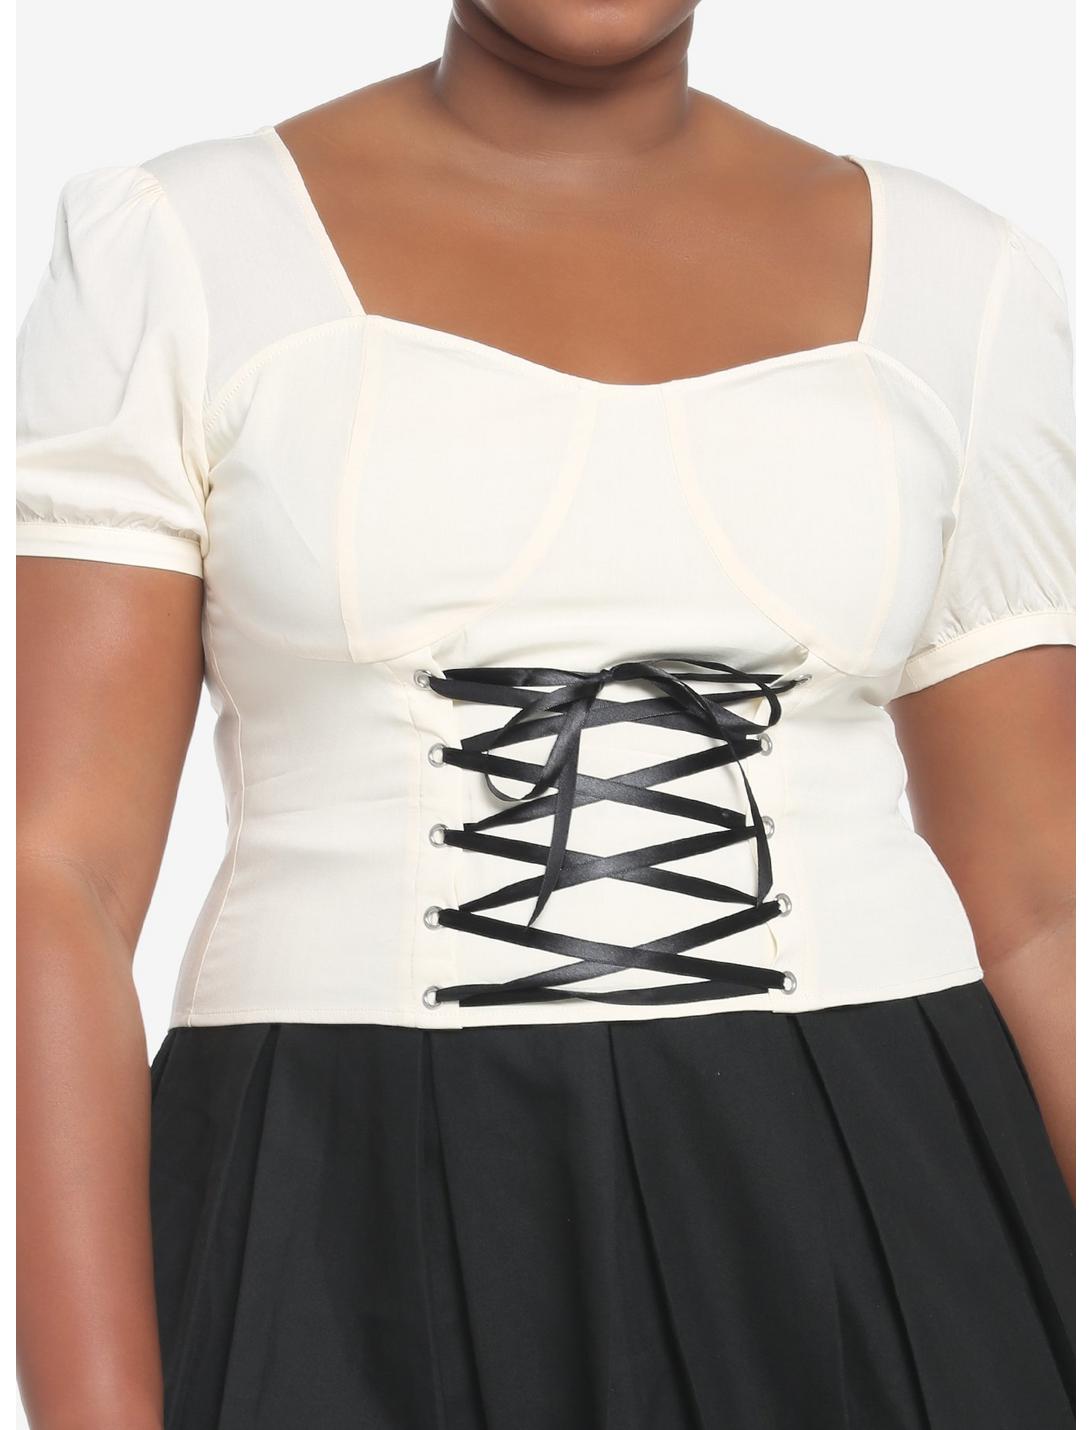 Ivory Corset Lace-Up Girls Crop Top Plus Size, IVORY, hi-res